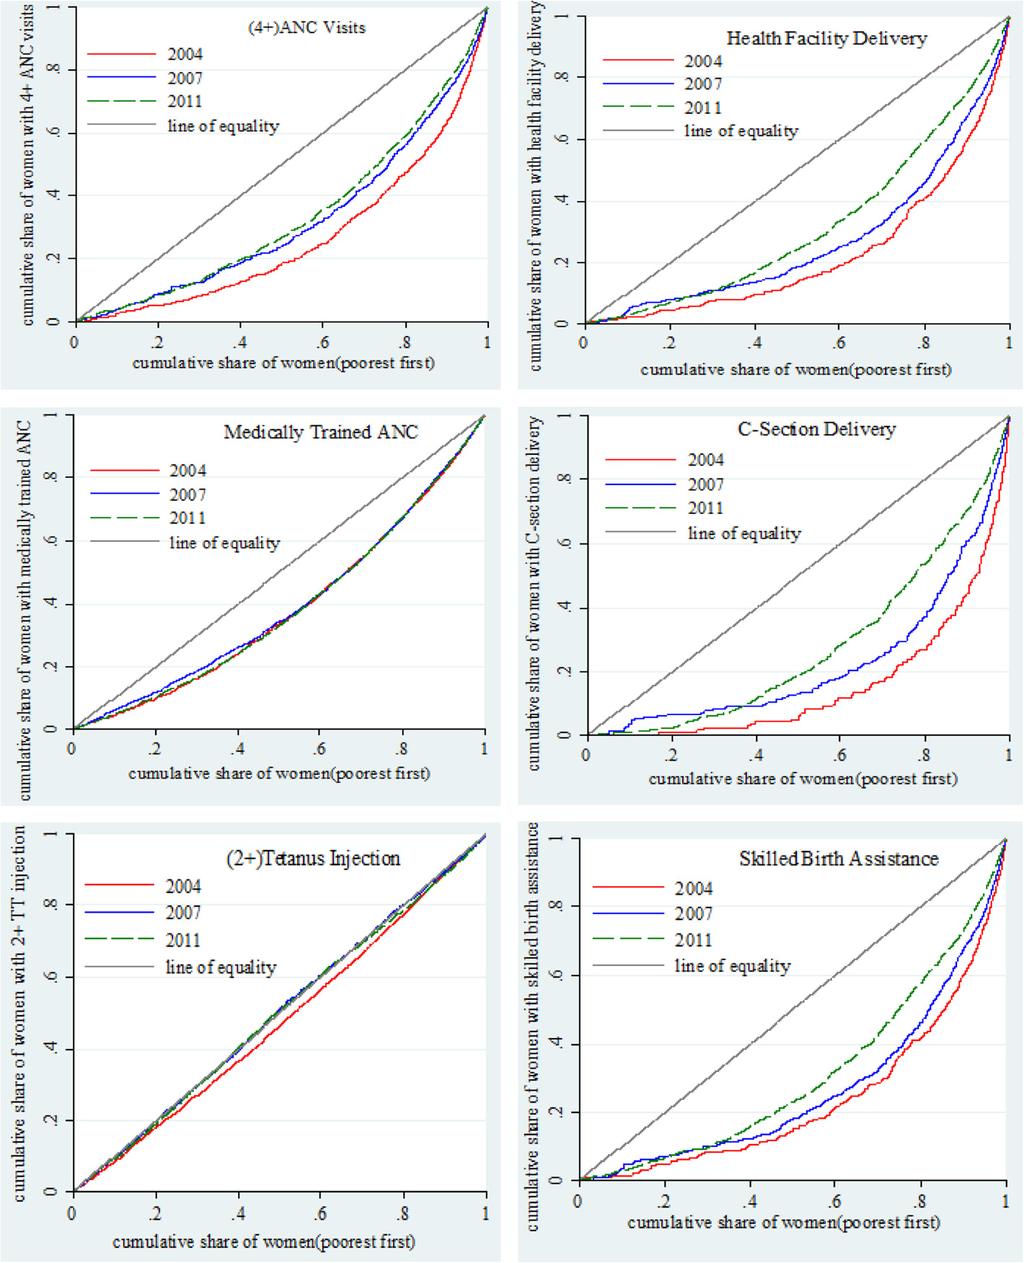 Pulok et al. BMC Pregnancy and Childbirth (2016) 16:200 Page 7 of 16 Fig. 1 The concentration curves (CC) of ANC and delivery care services utilization in Bangladesh, 2004 2011.